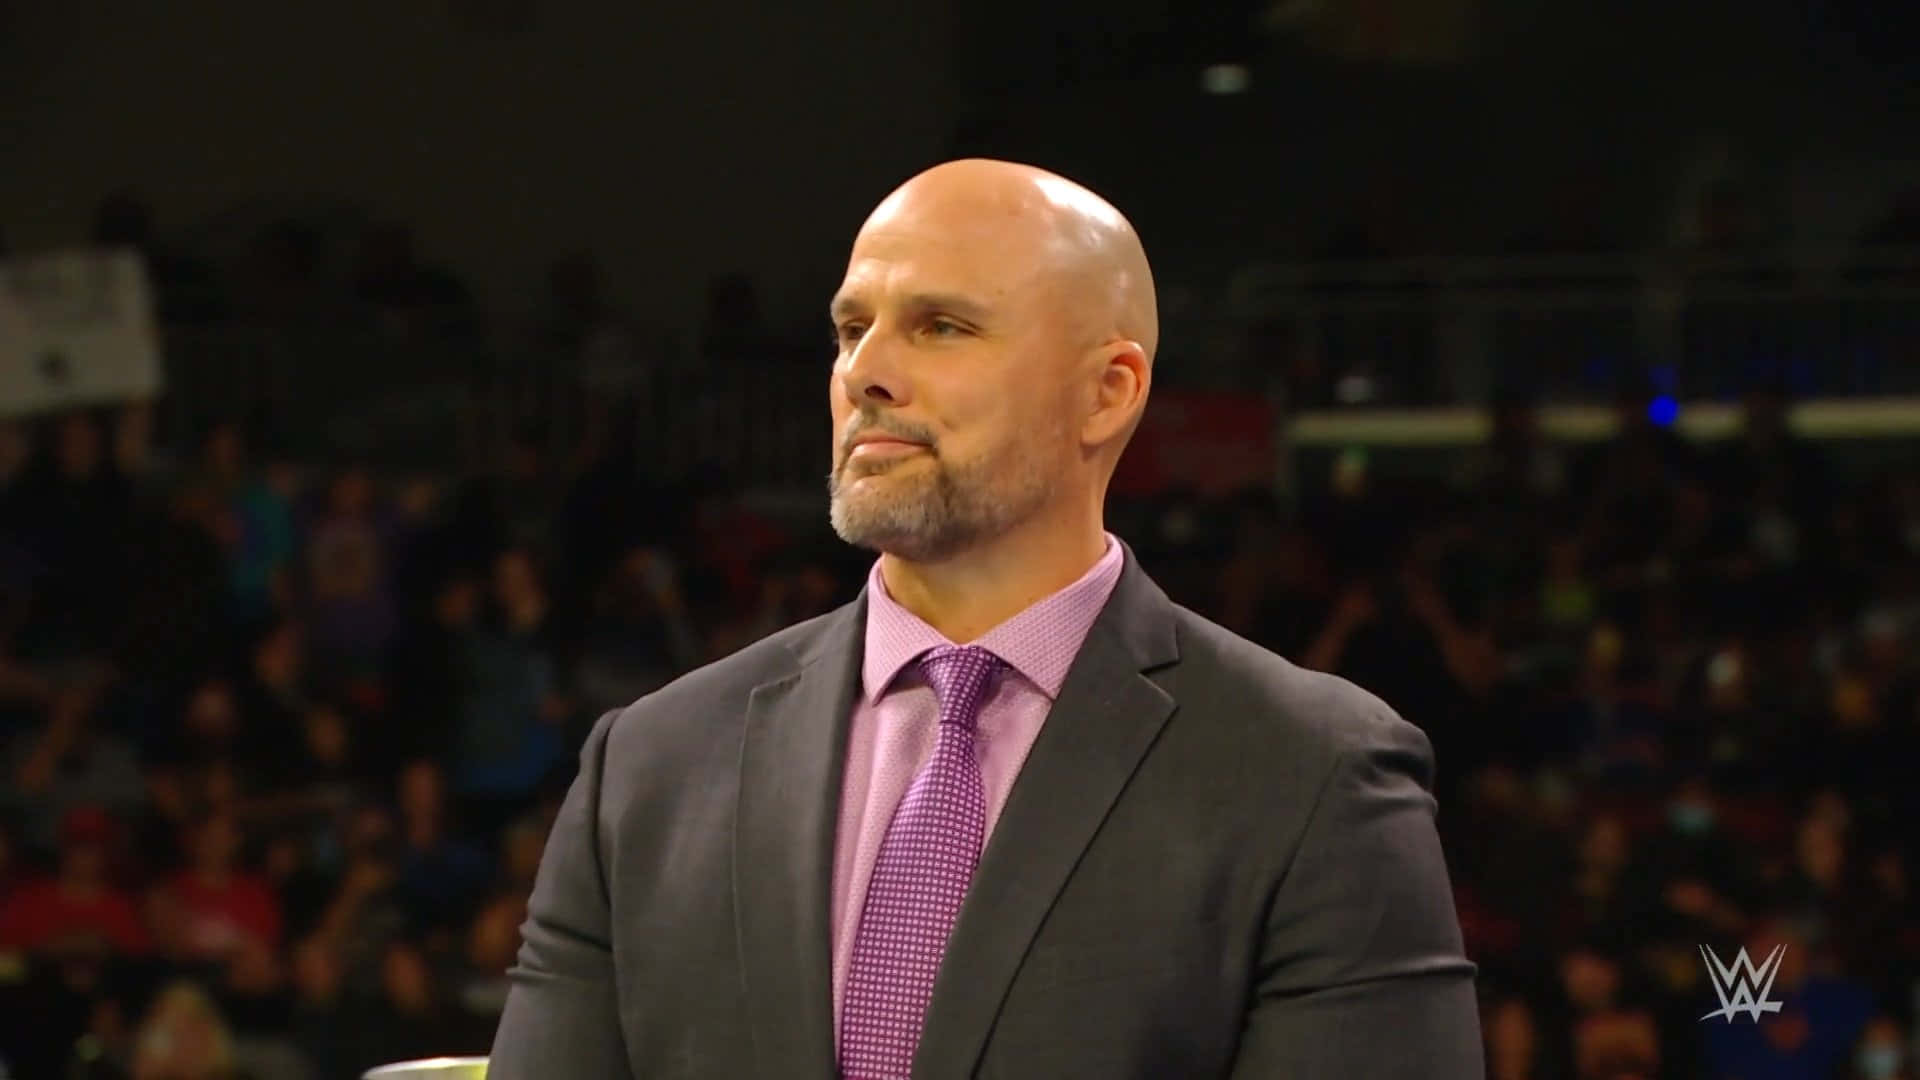 Caption: Adam Pearce - The Director of WWE Live Events Wallpaper